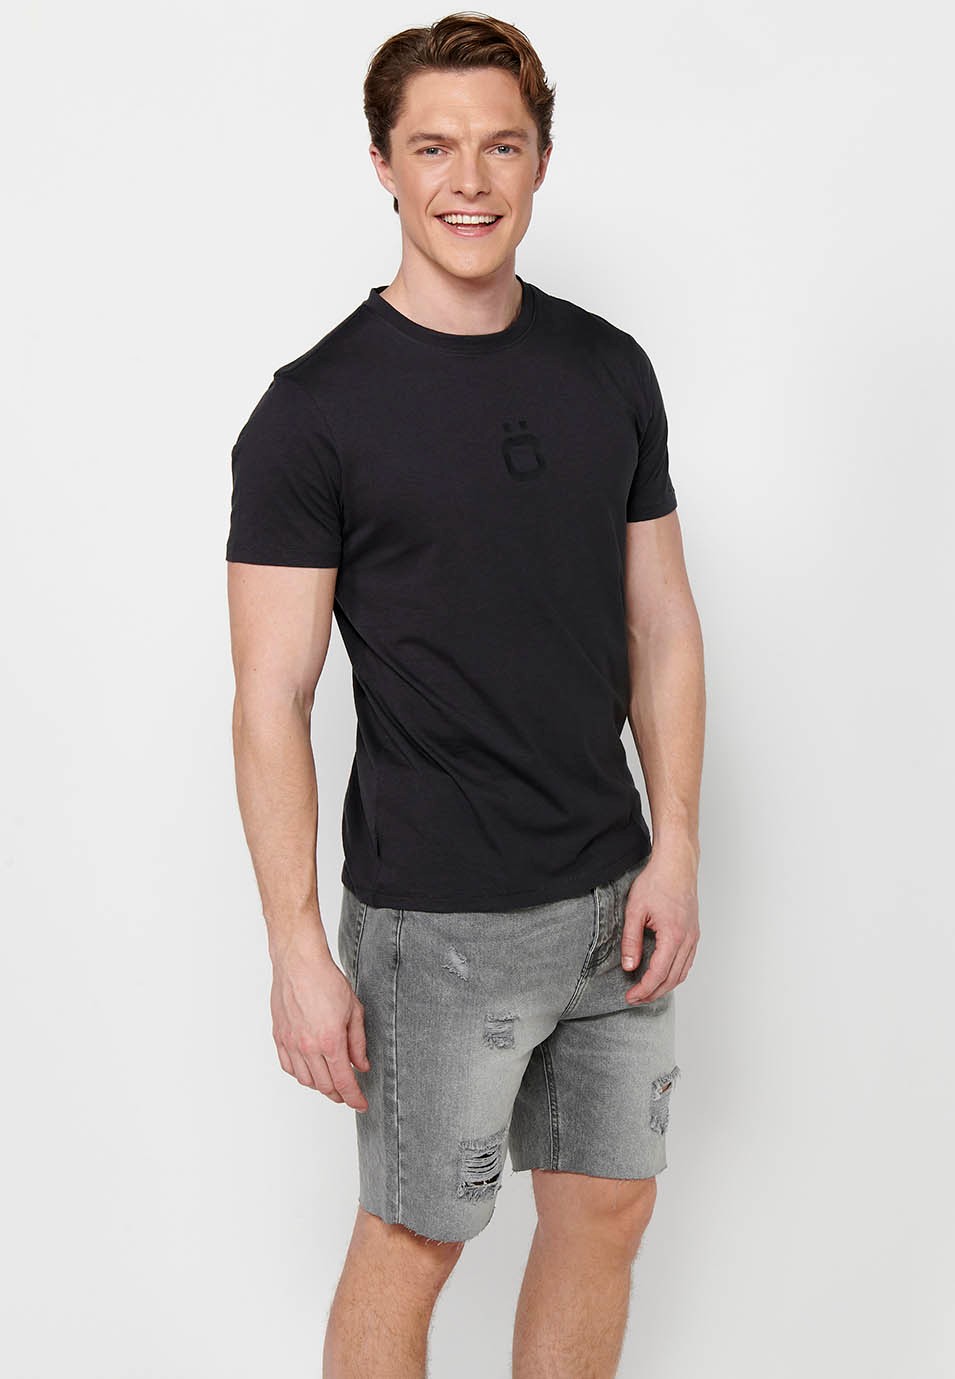 Short sleeve round neck t-shirt with front logo in black for men